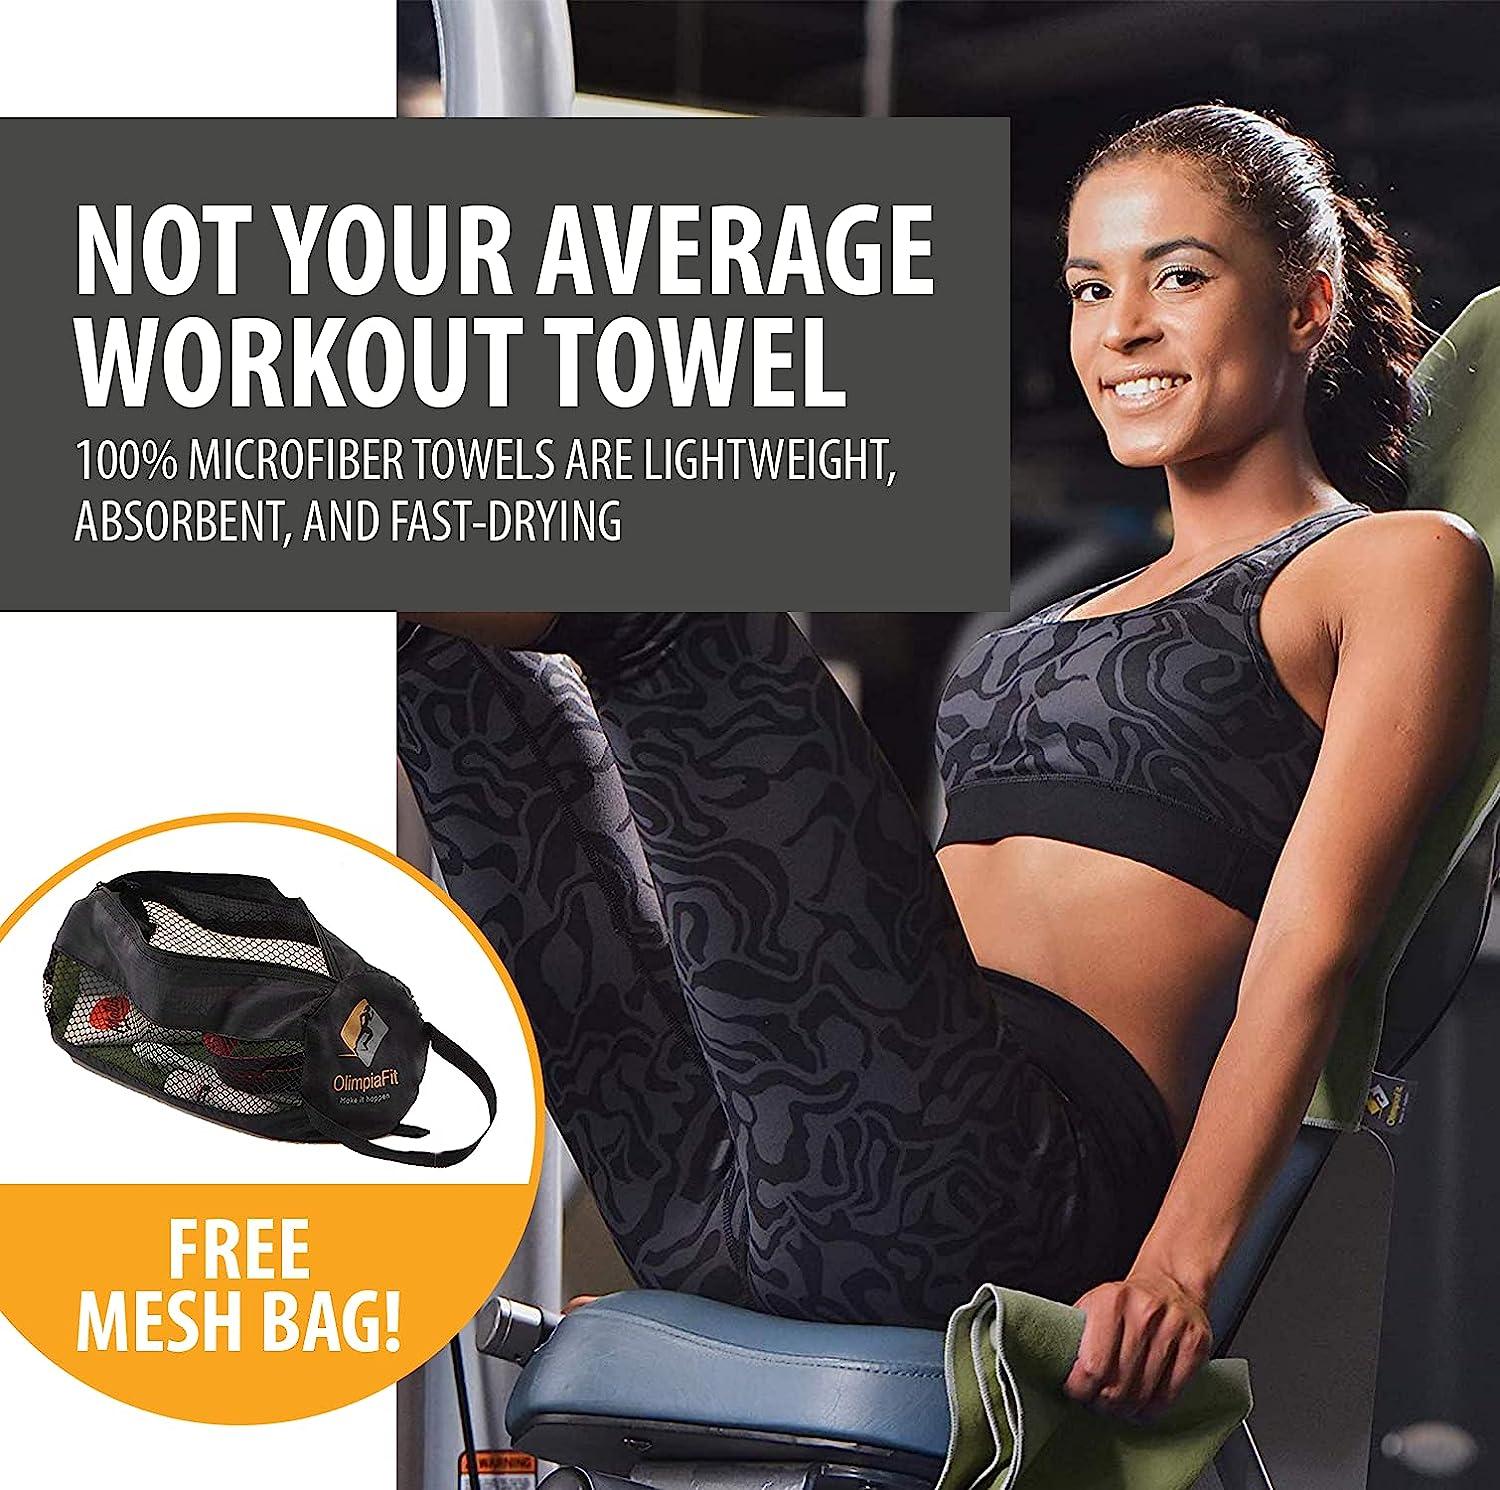 Workout Towels, How to Choose Towels for Your Gym